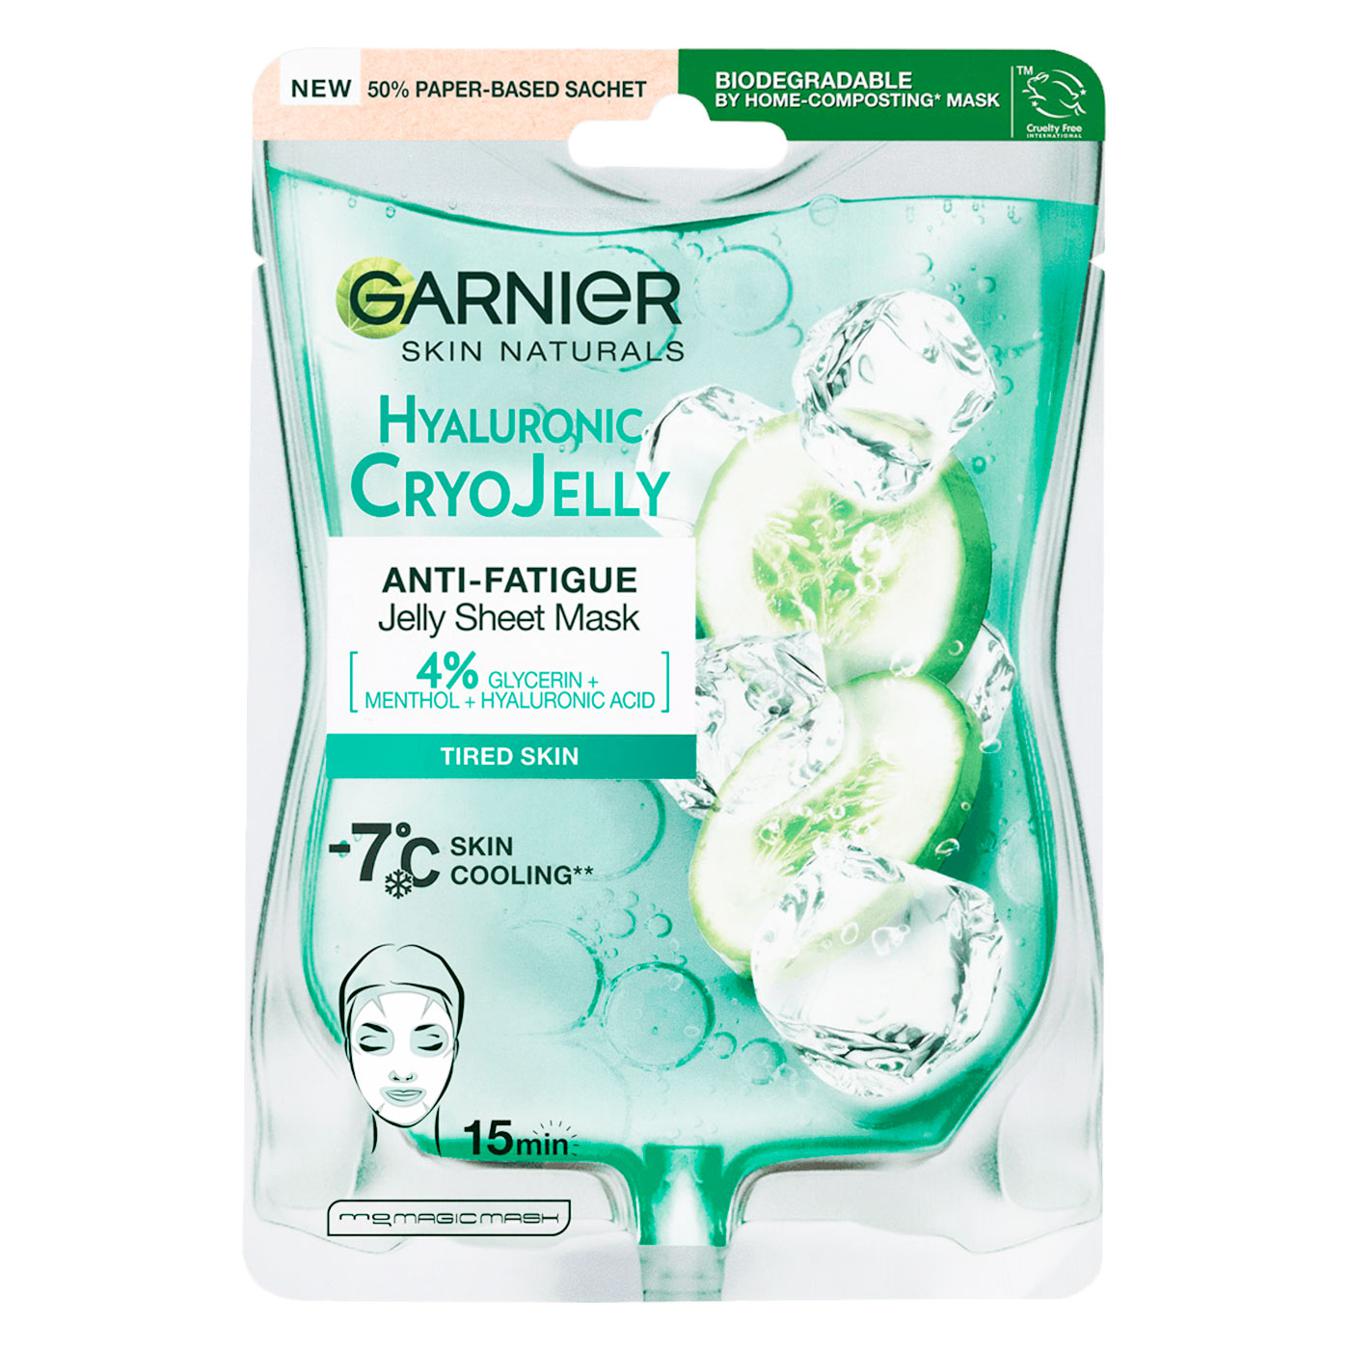 Garnier skin naturals fabric hyaluronic jelly mask with cooling and moisturizing effect 27g